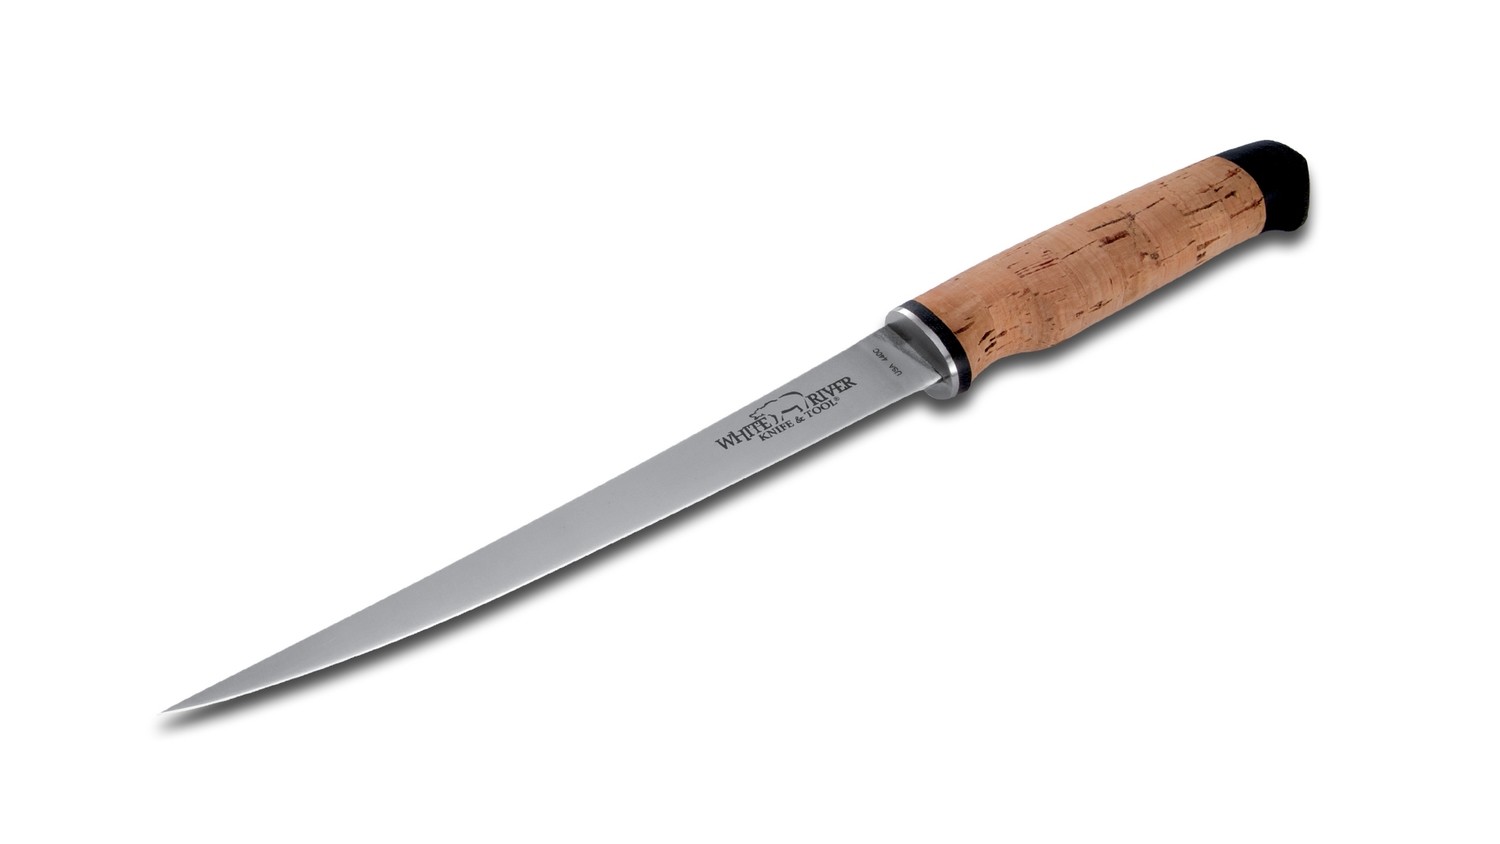 White River Traditional Fillet Knife — 8.5 inch, Cork